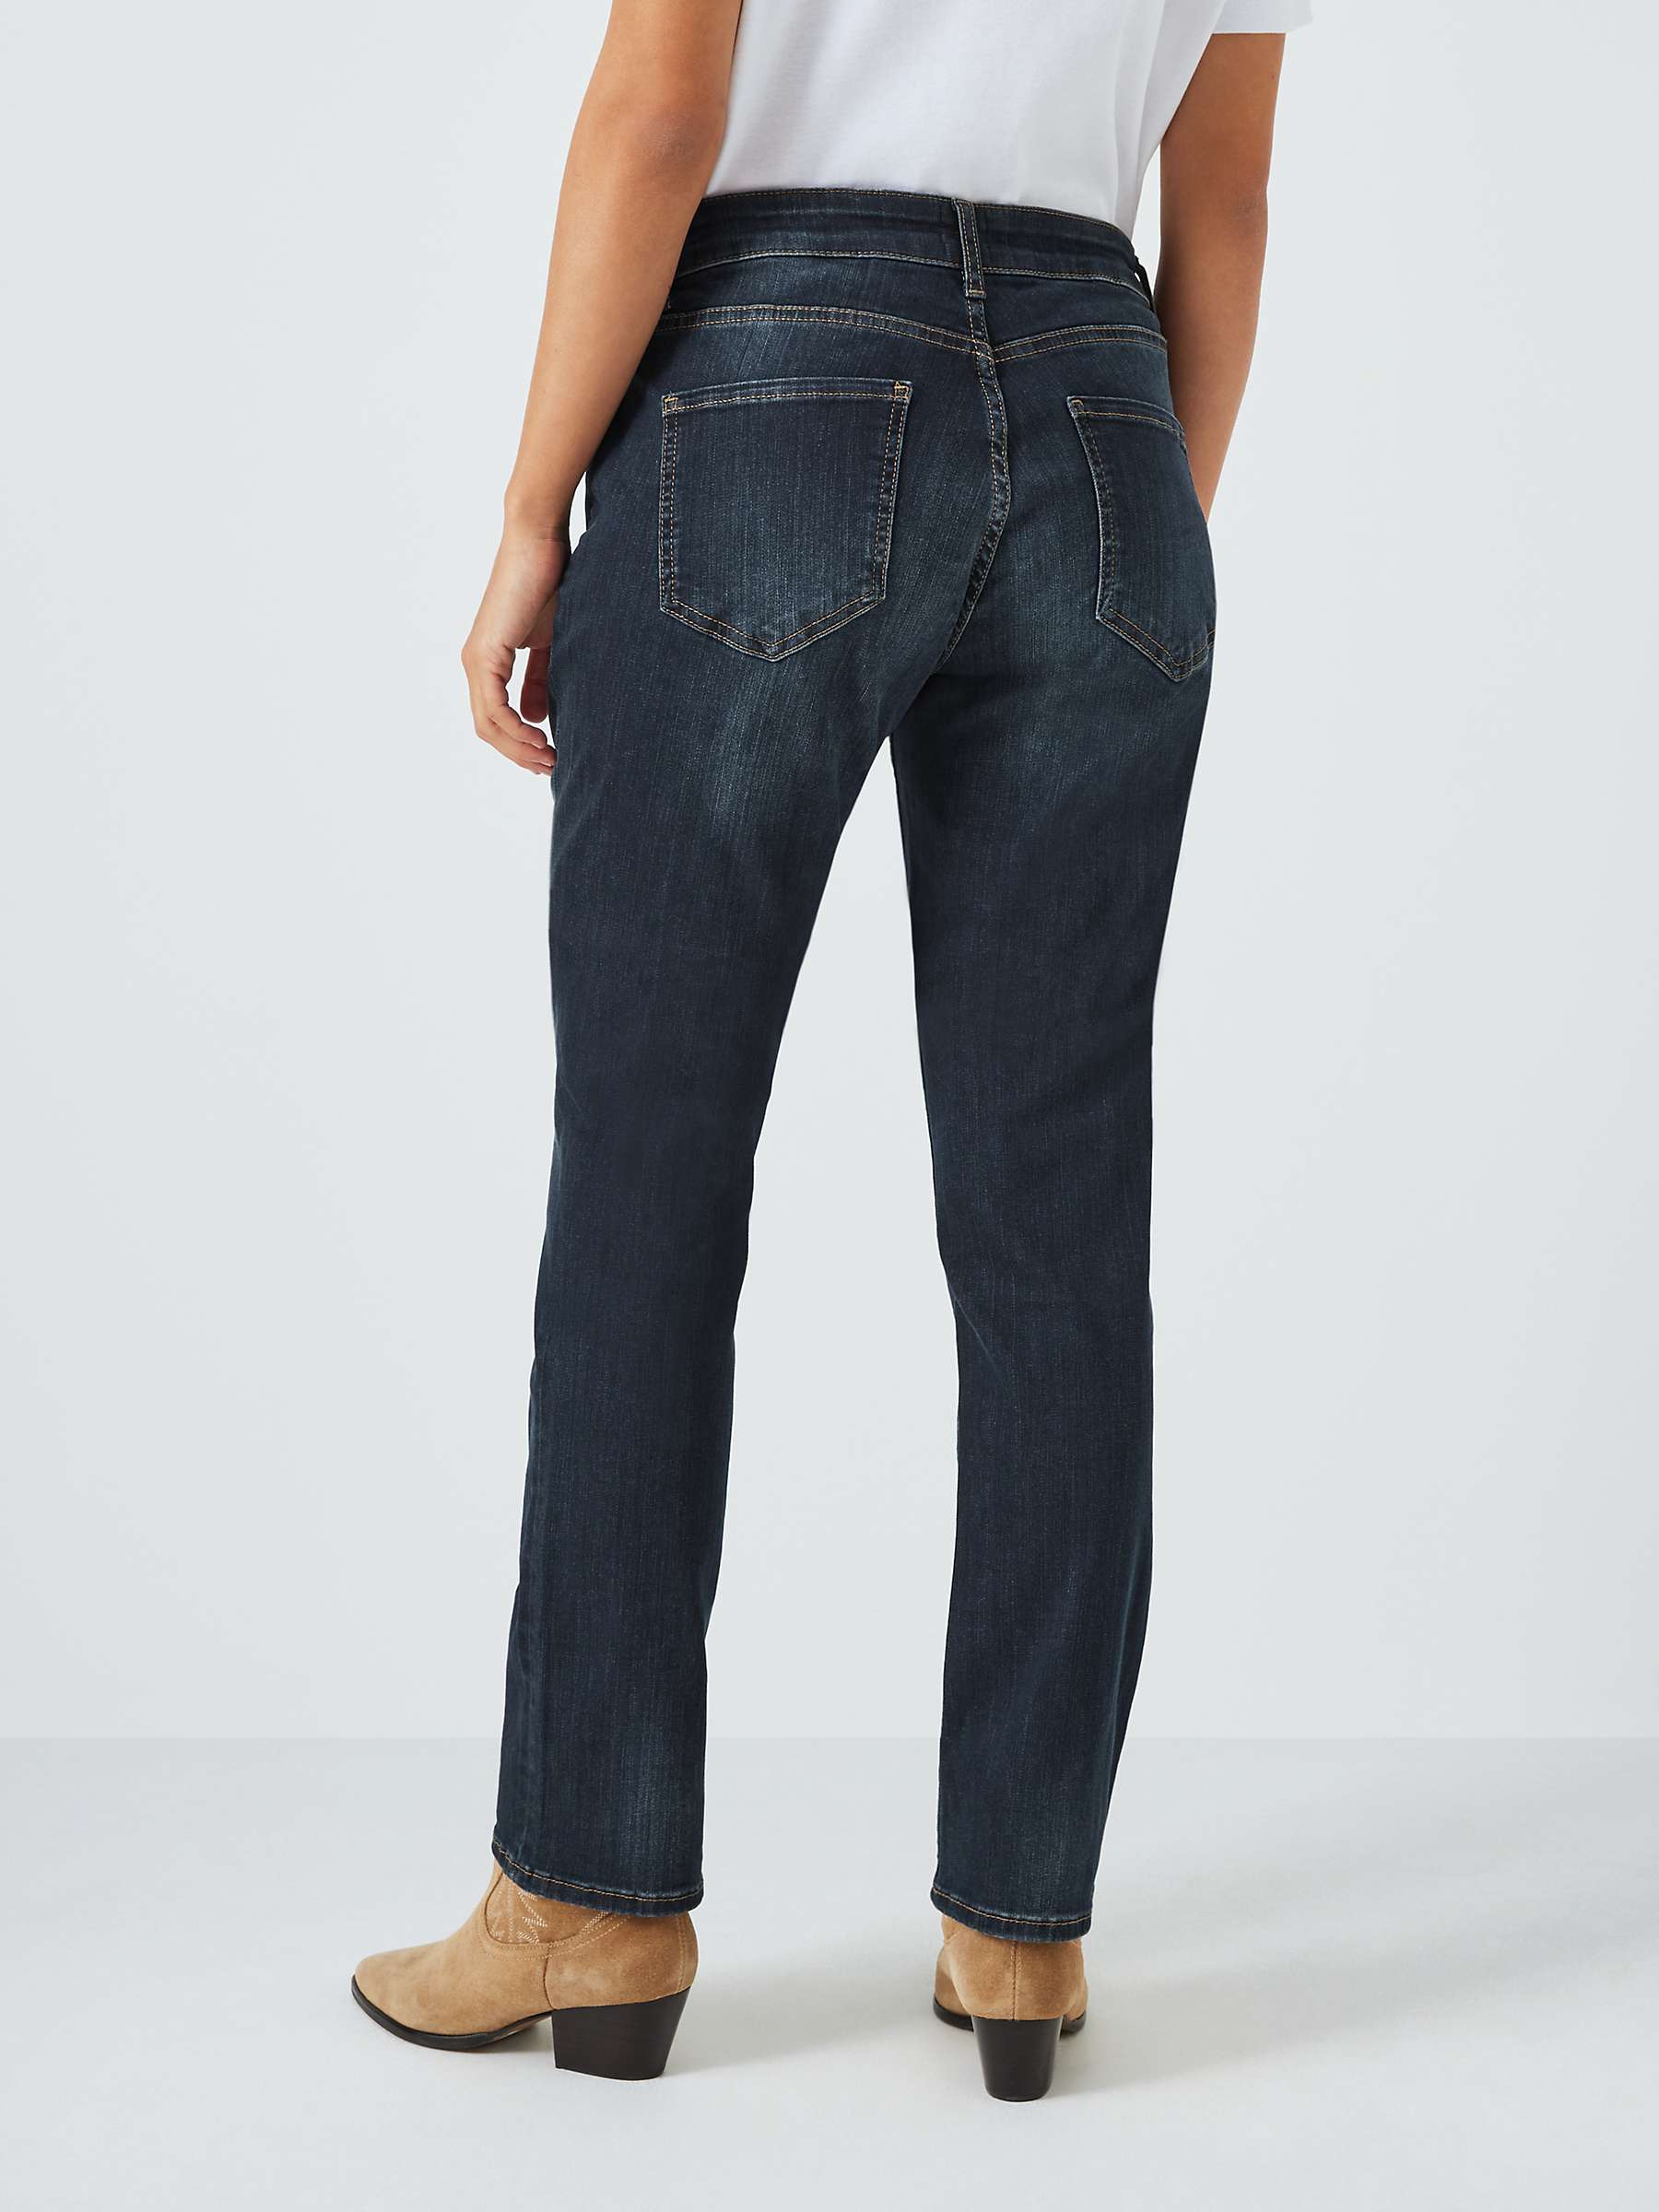 Buy AND/OR Silverlake Straight Leg Jeans, Deja Blue Online at johnlewis.com